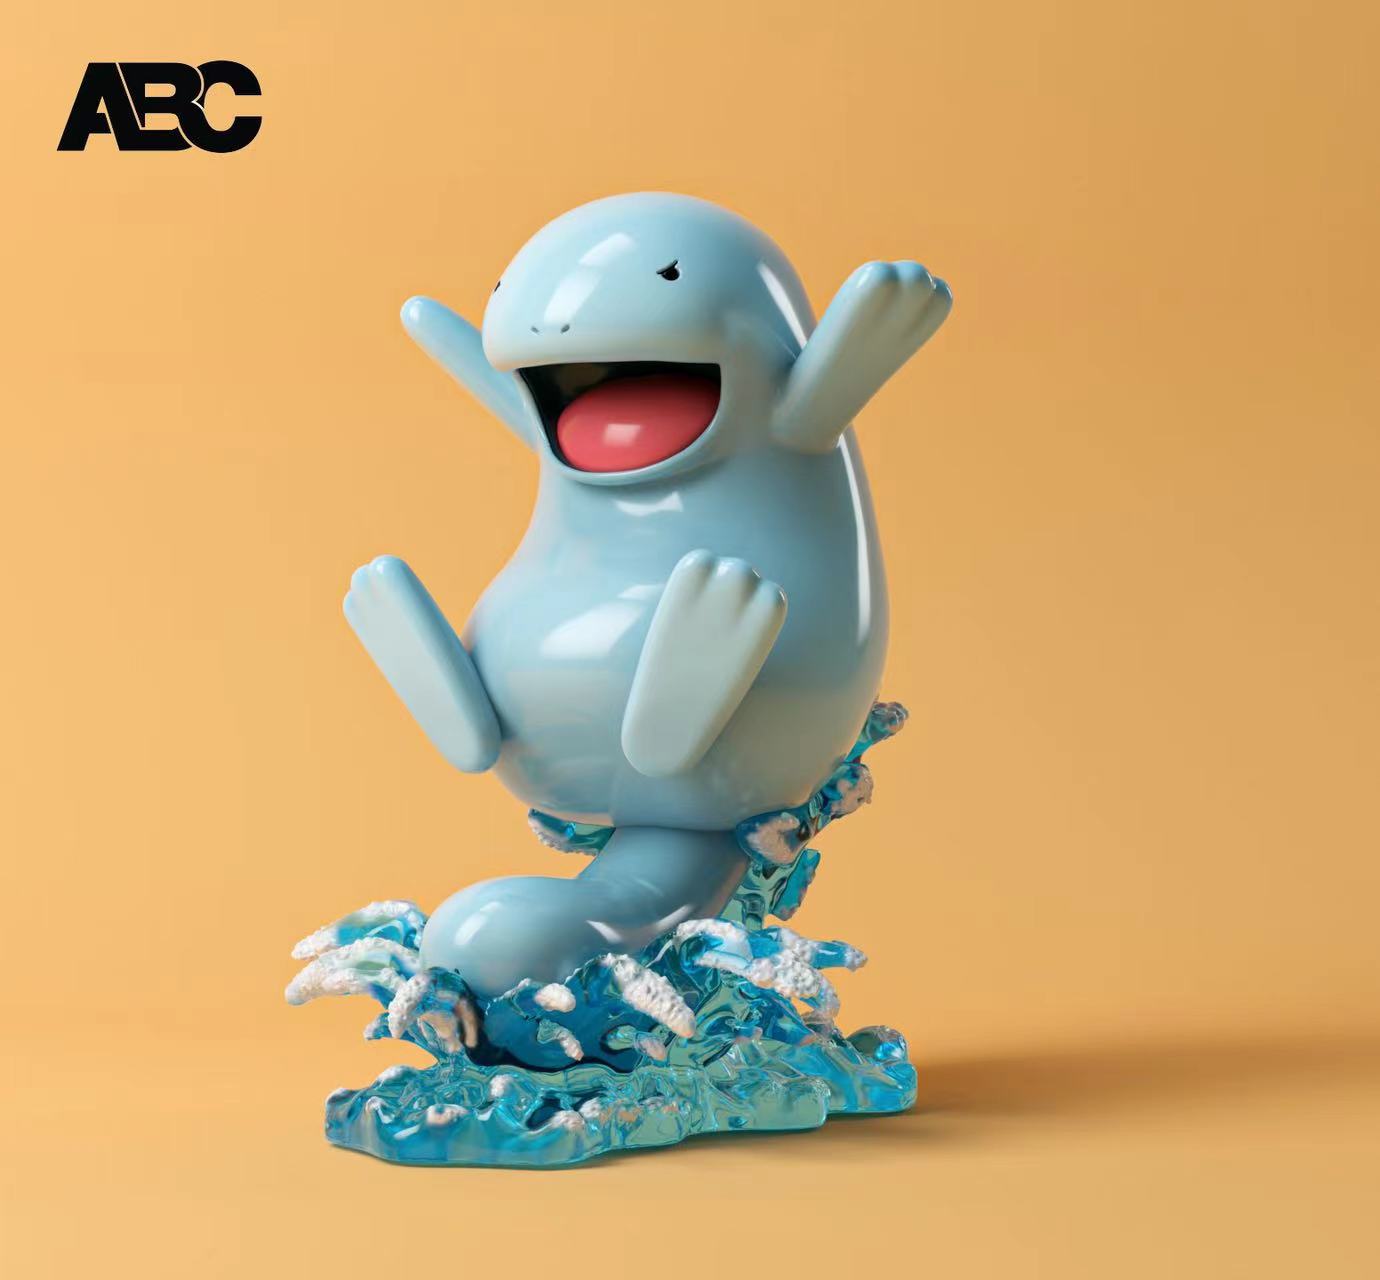 [PREORDER CLOSED] 1/20 Scale World [ABC] - Quagsire in Battle Position